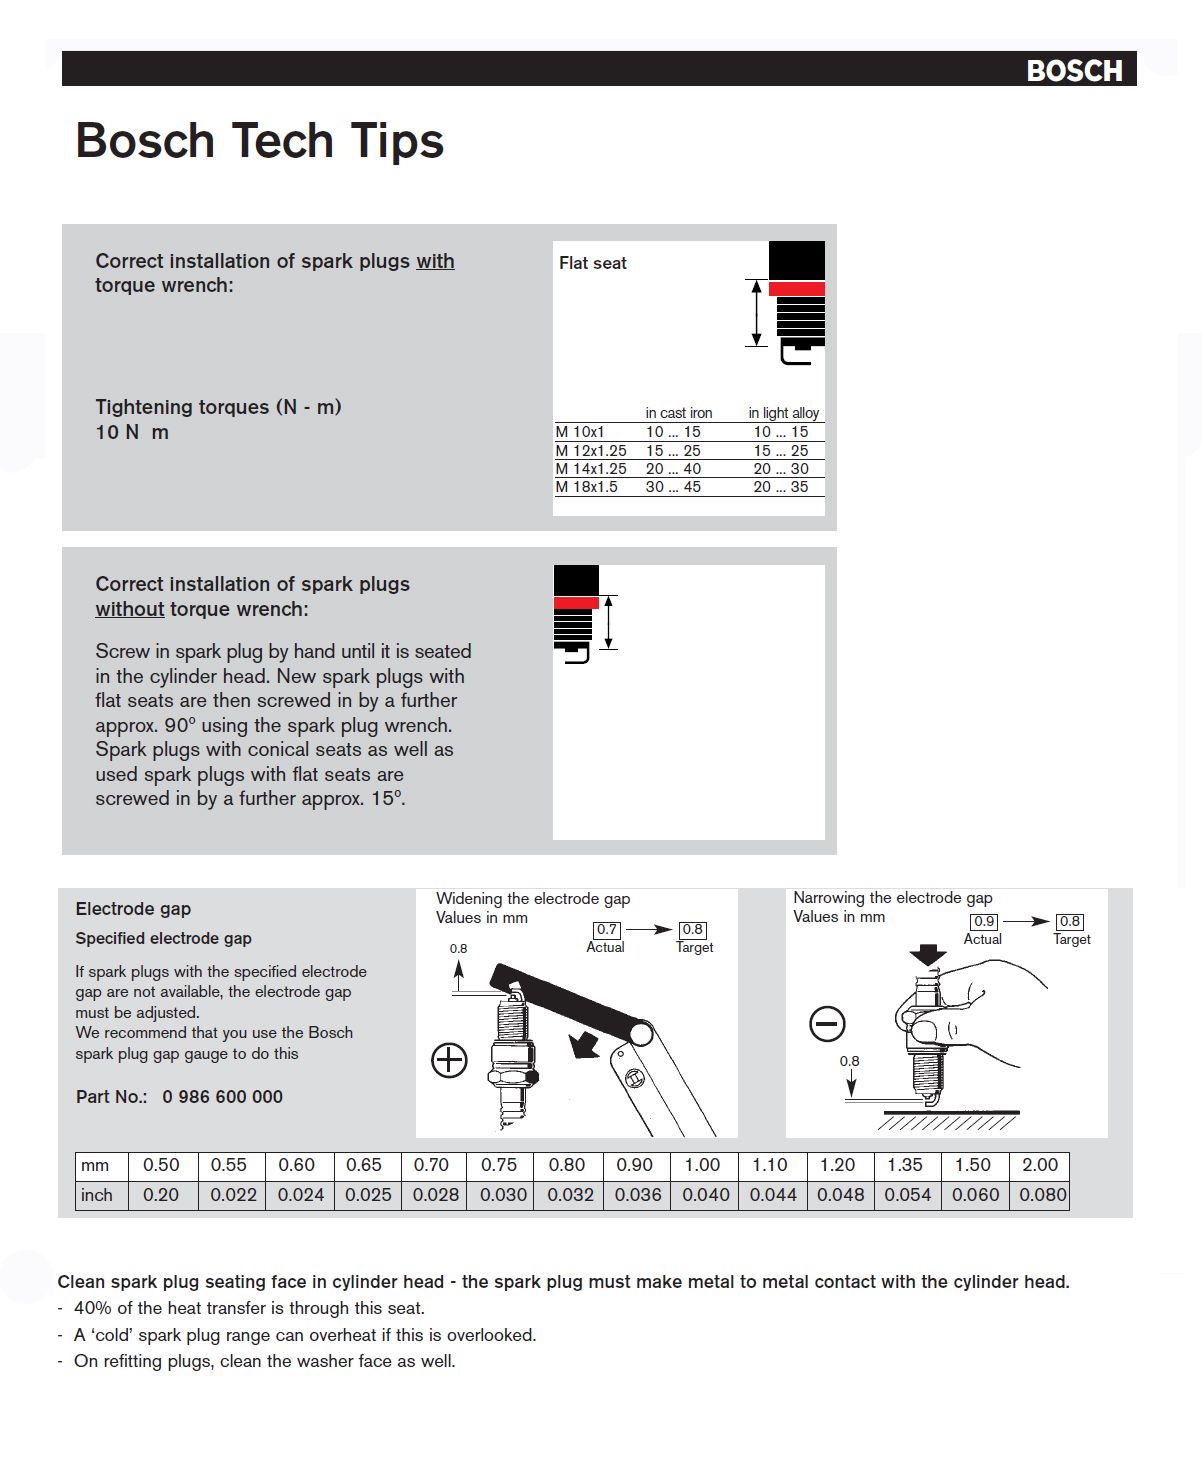 Bosch tech tips for correct installation of spark plugs. BMW classic motorcycles